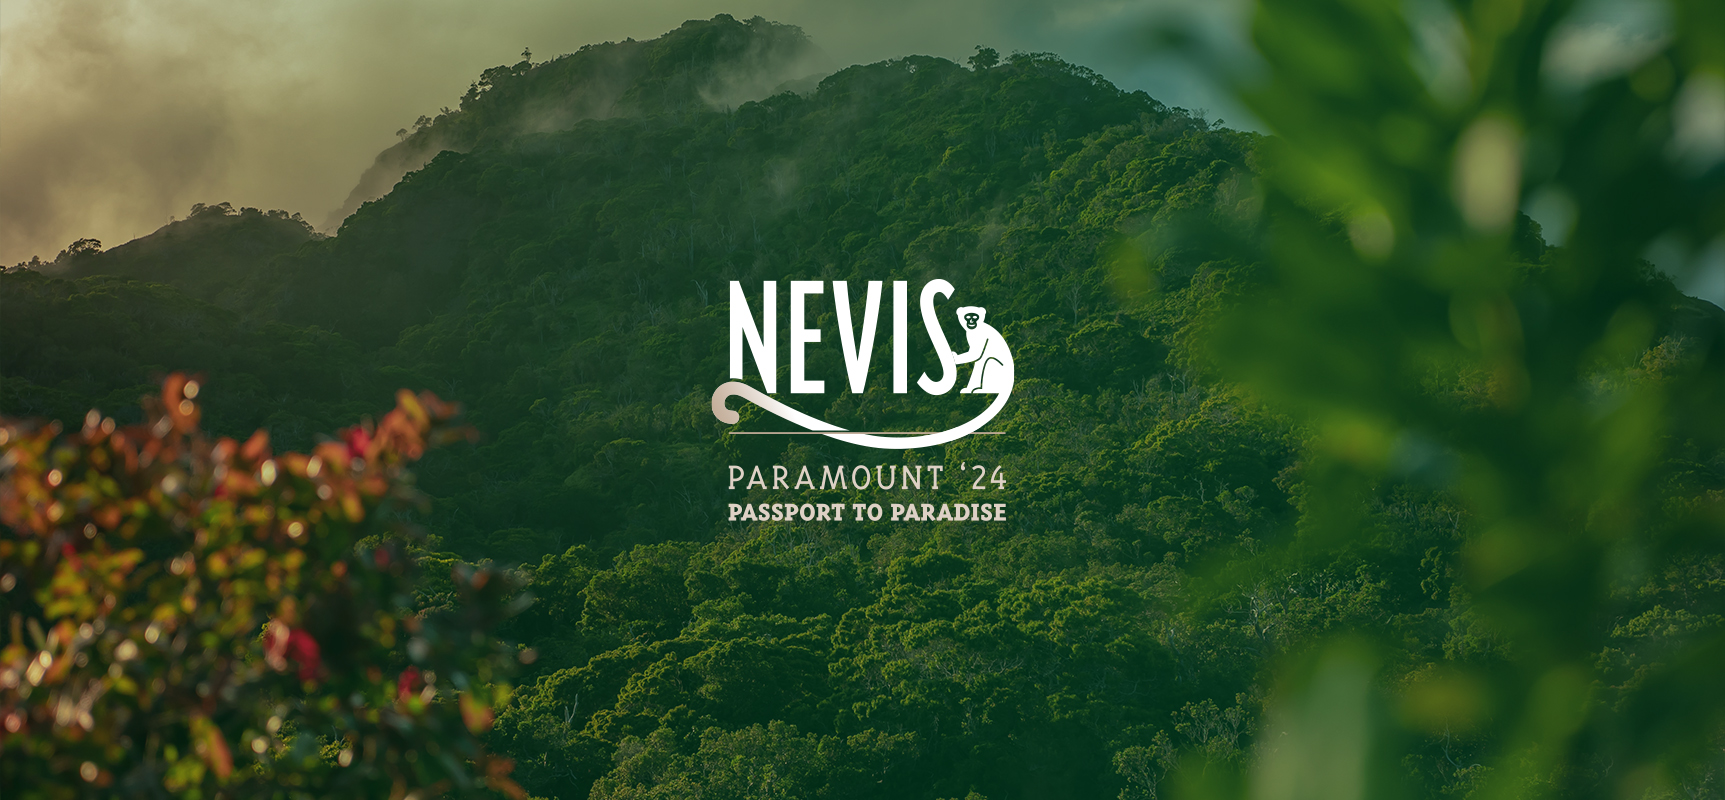 Nevis Paramount Passport to Paradise trip logo with a tropical caribbean mountain in the background.